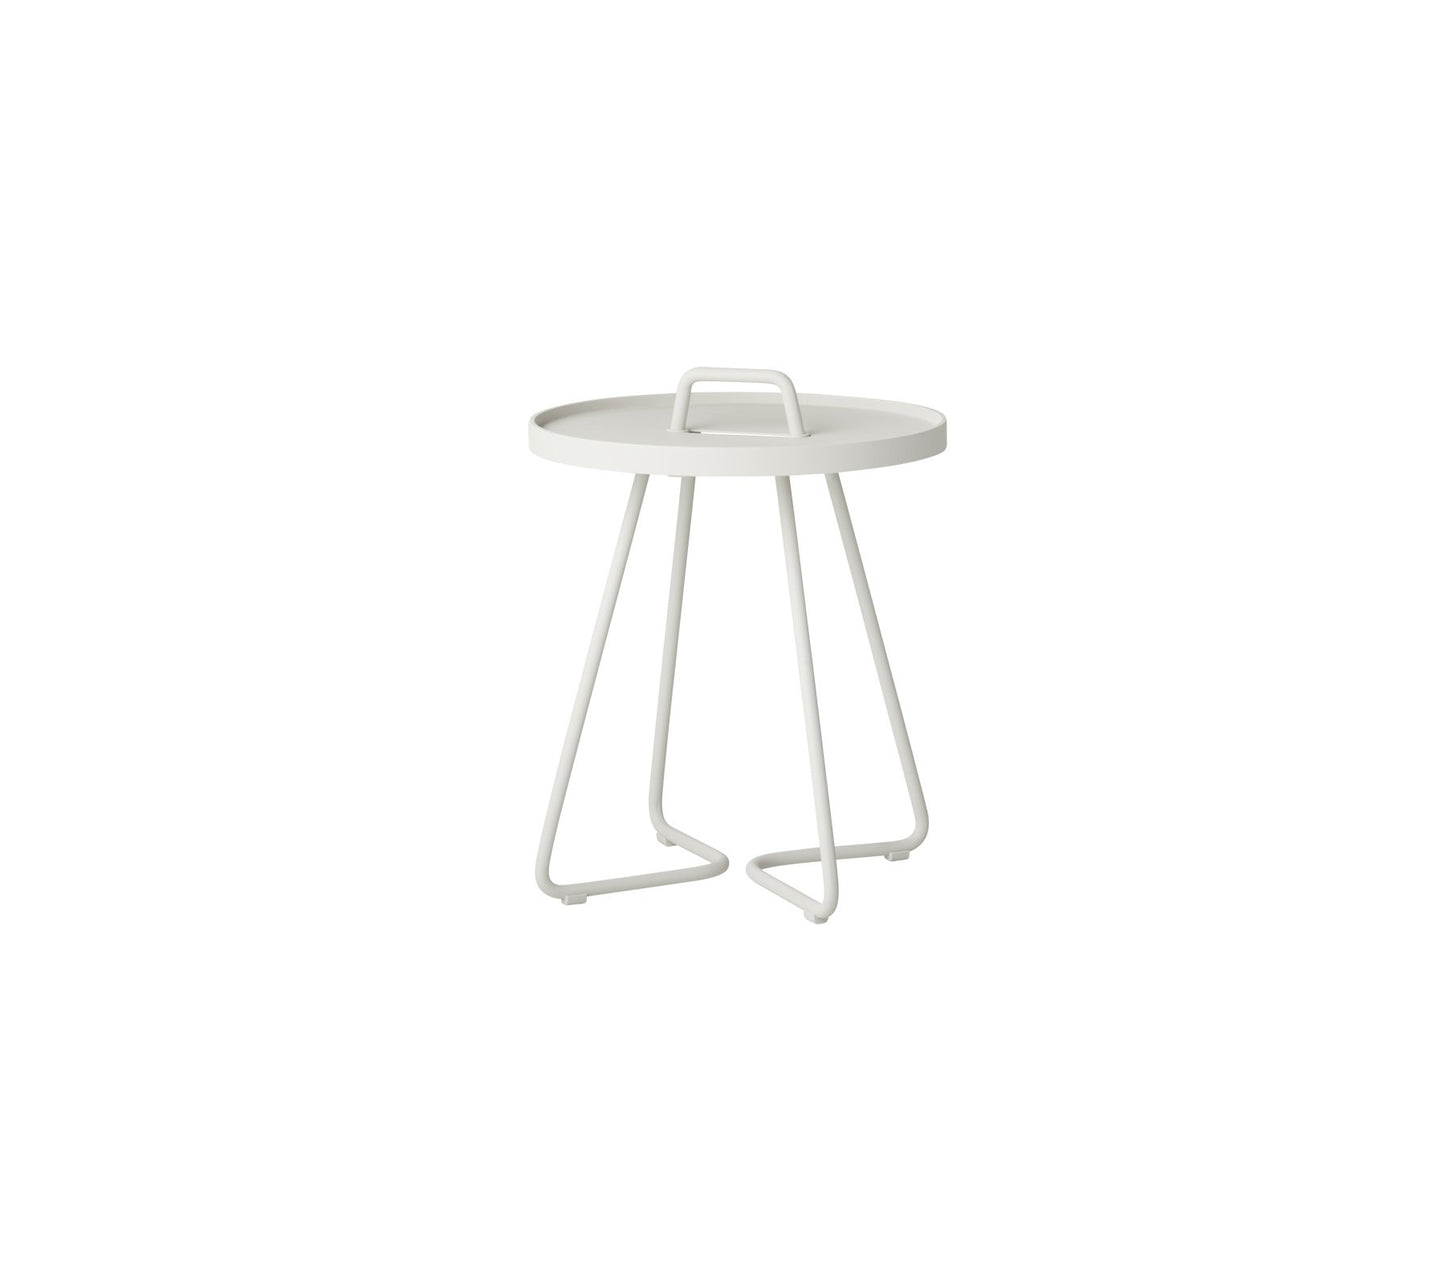 Cane-line On-the-Move Side Table X-Small